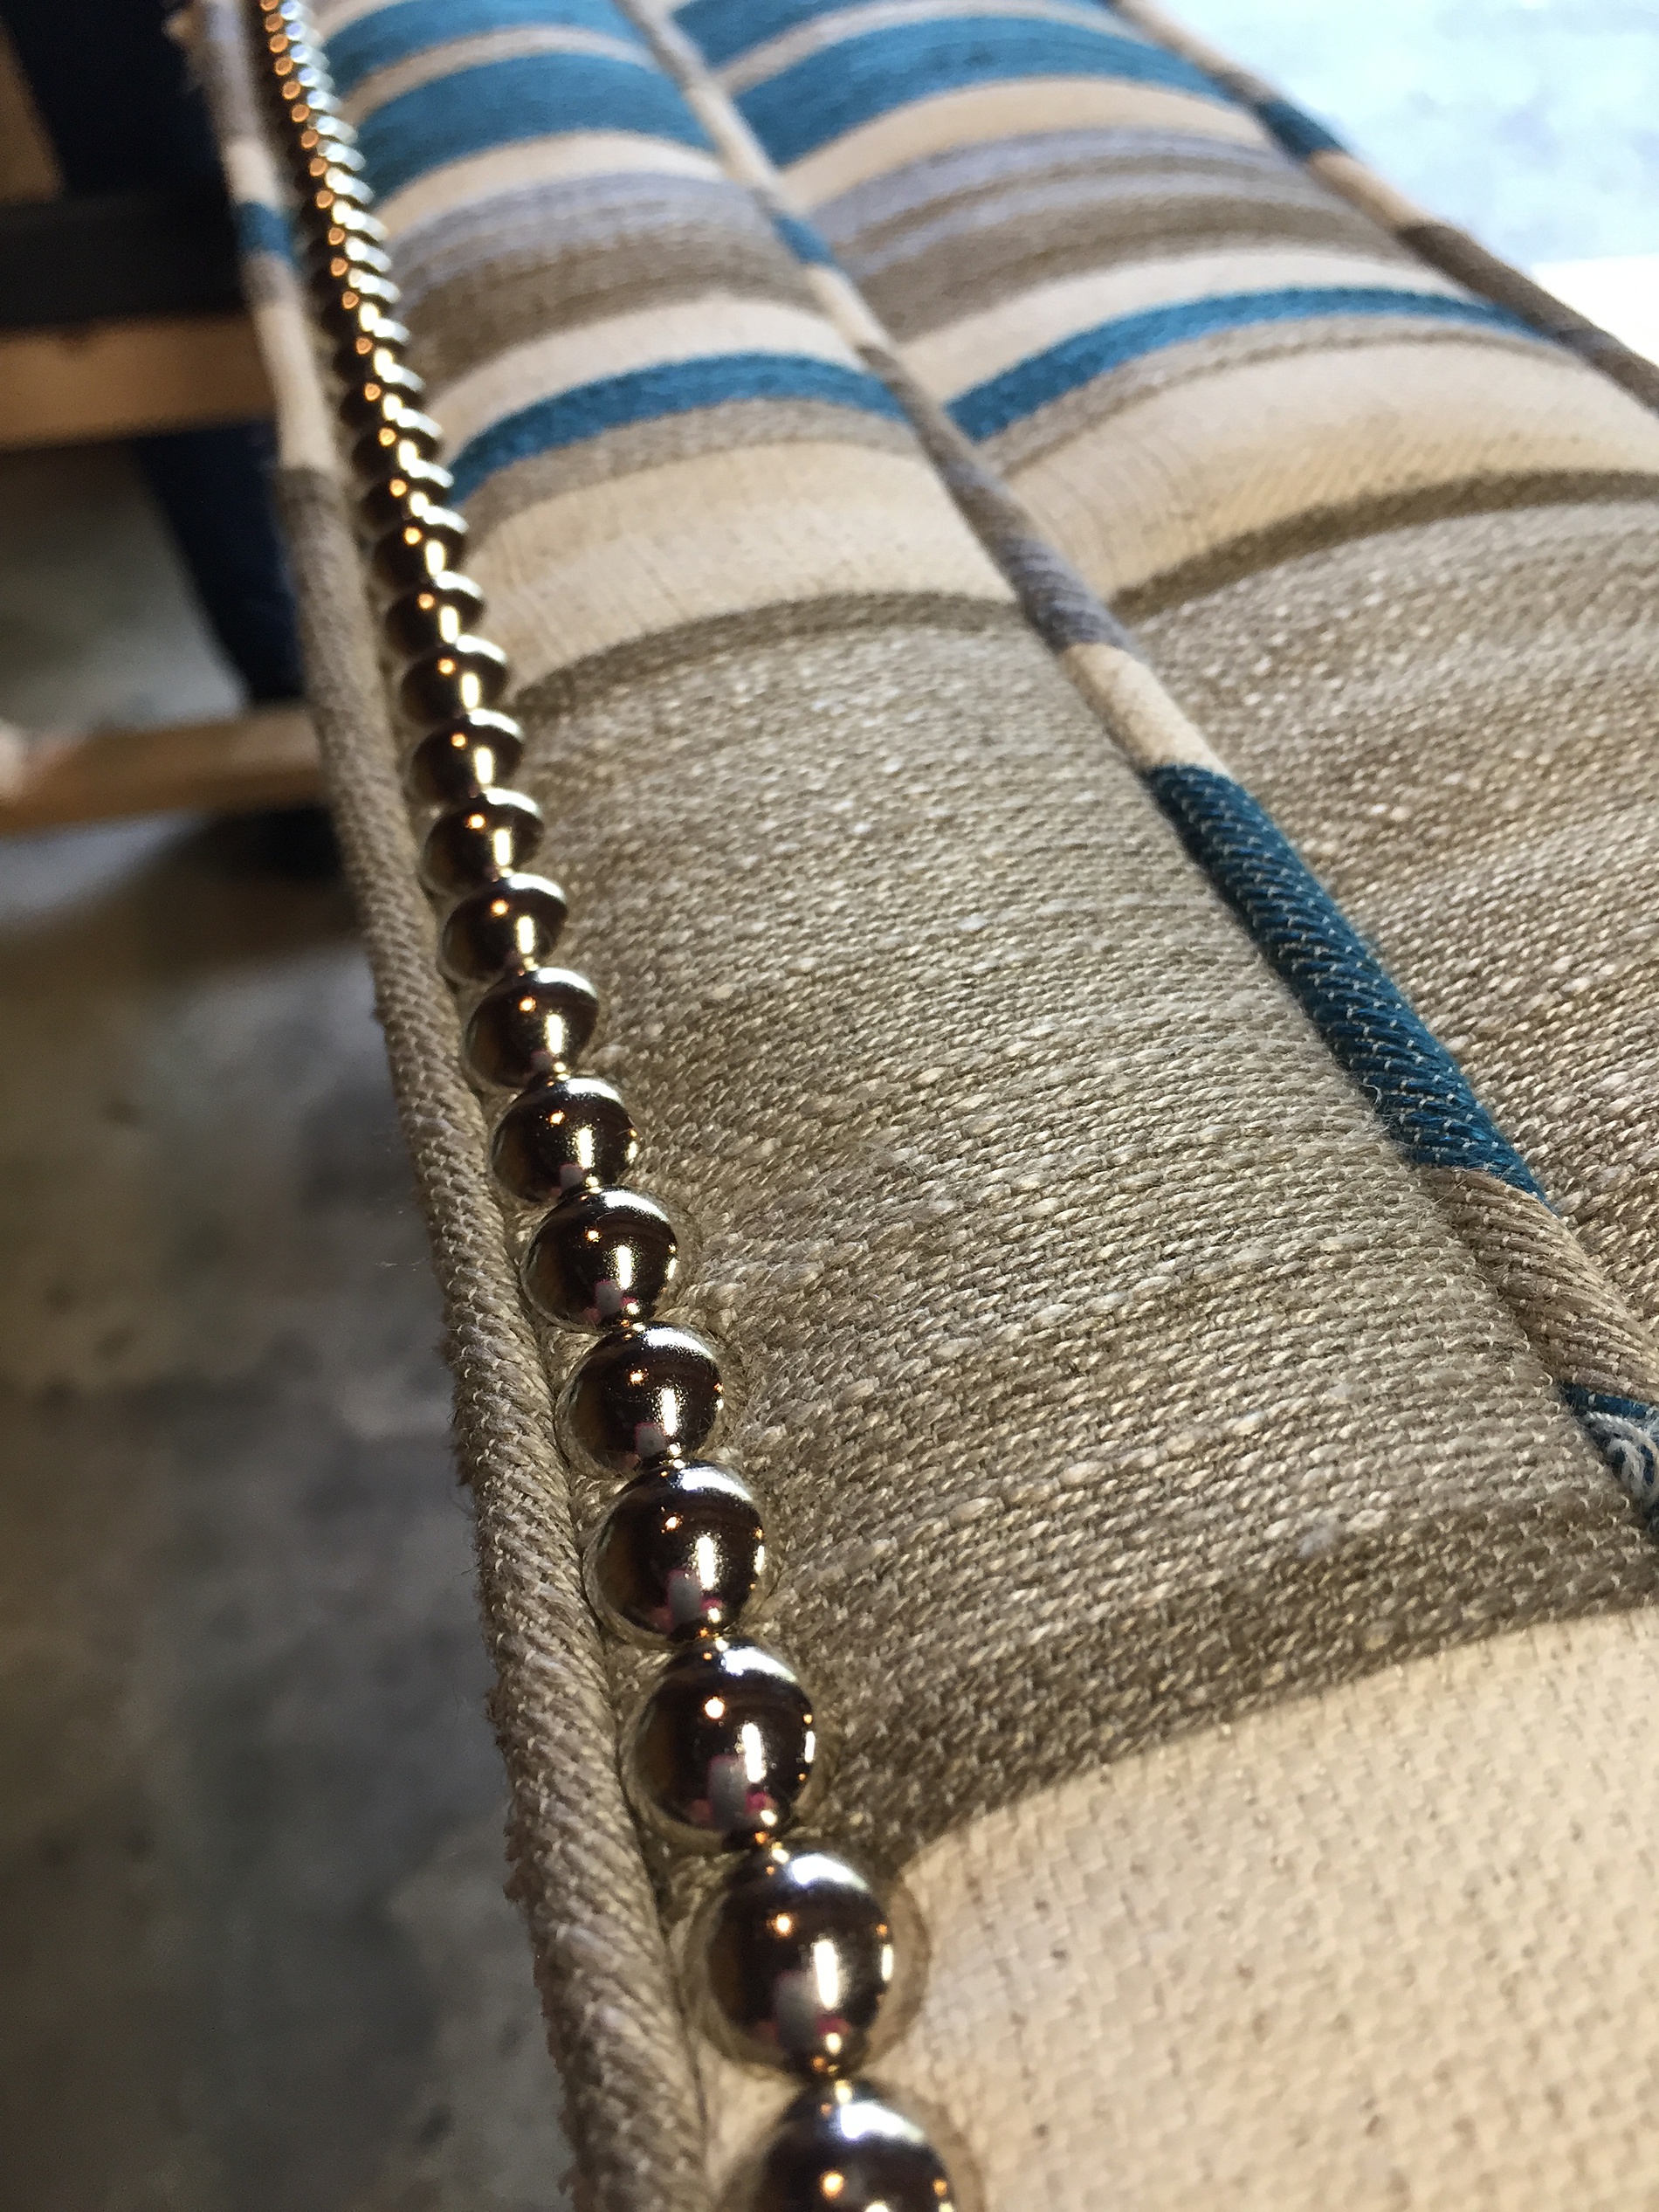 cording detail and decorative tacks on Final Phase of Reupholstered chair